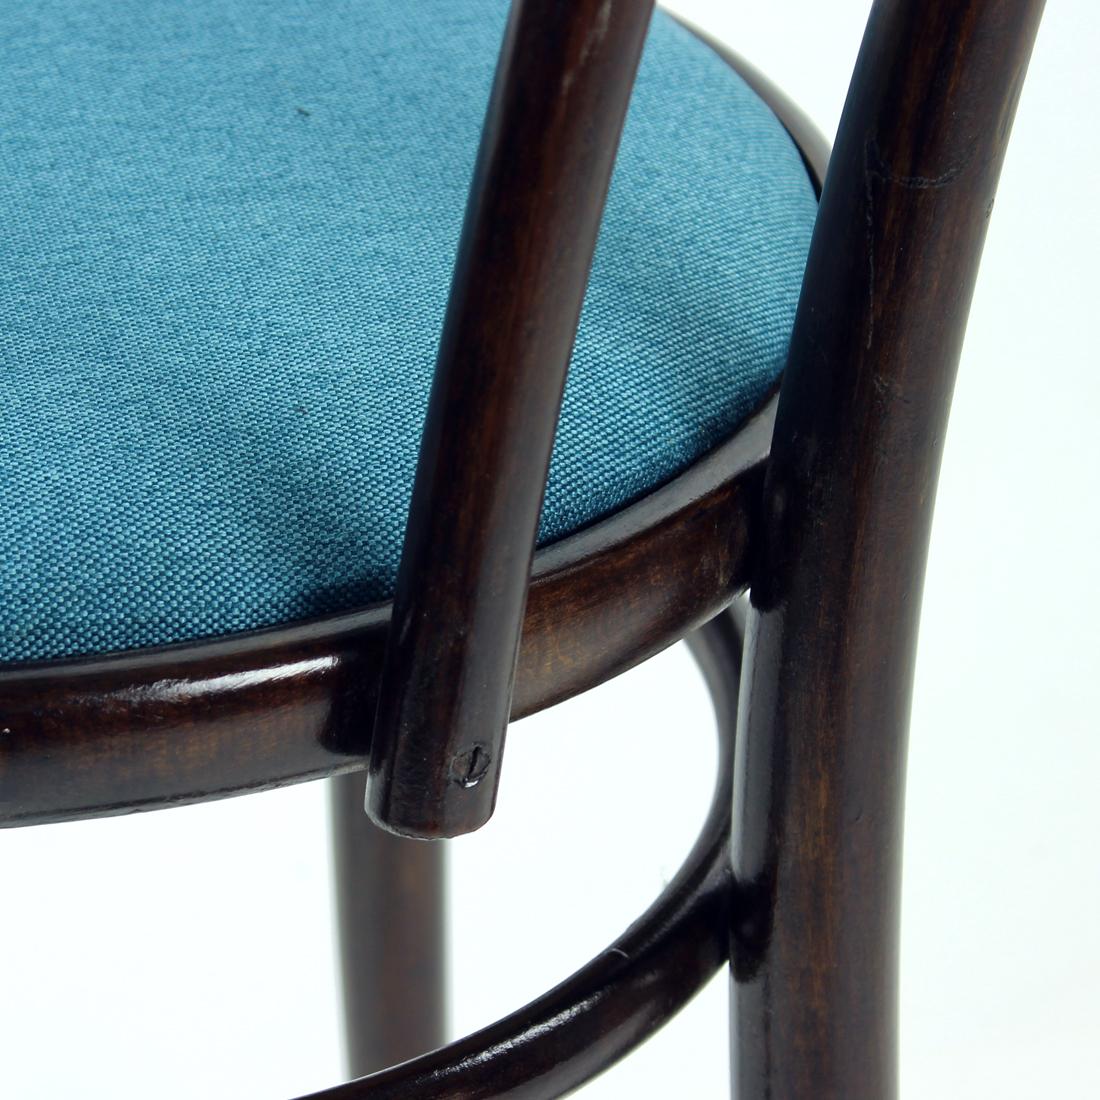 Thonet No. 16 Bistro Chair Model by Ton, Czechoslovakia 1960s For Sale 4